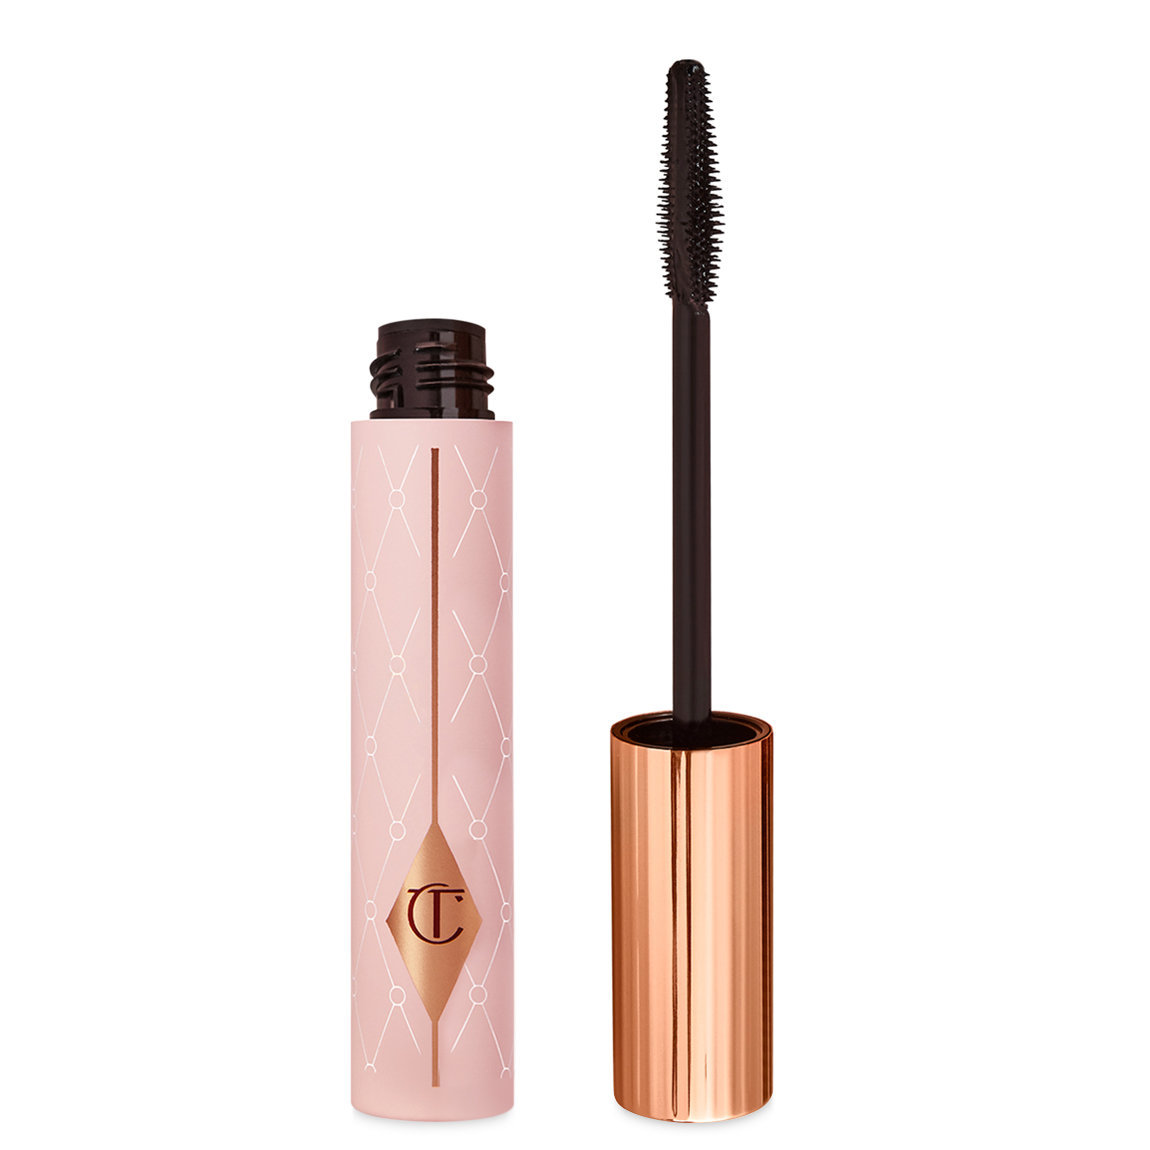 Charlotte Tilbury Pillow Talk Push Up Lashes Full Size alternative view 1 - product swatch.